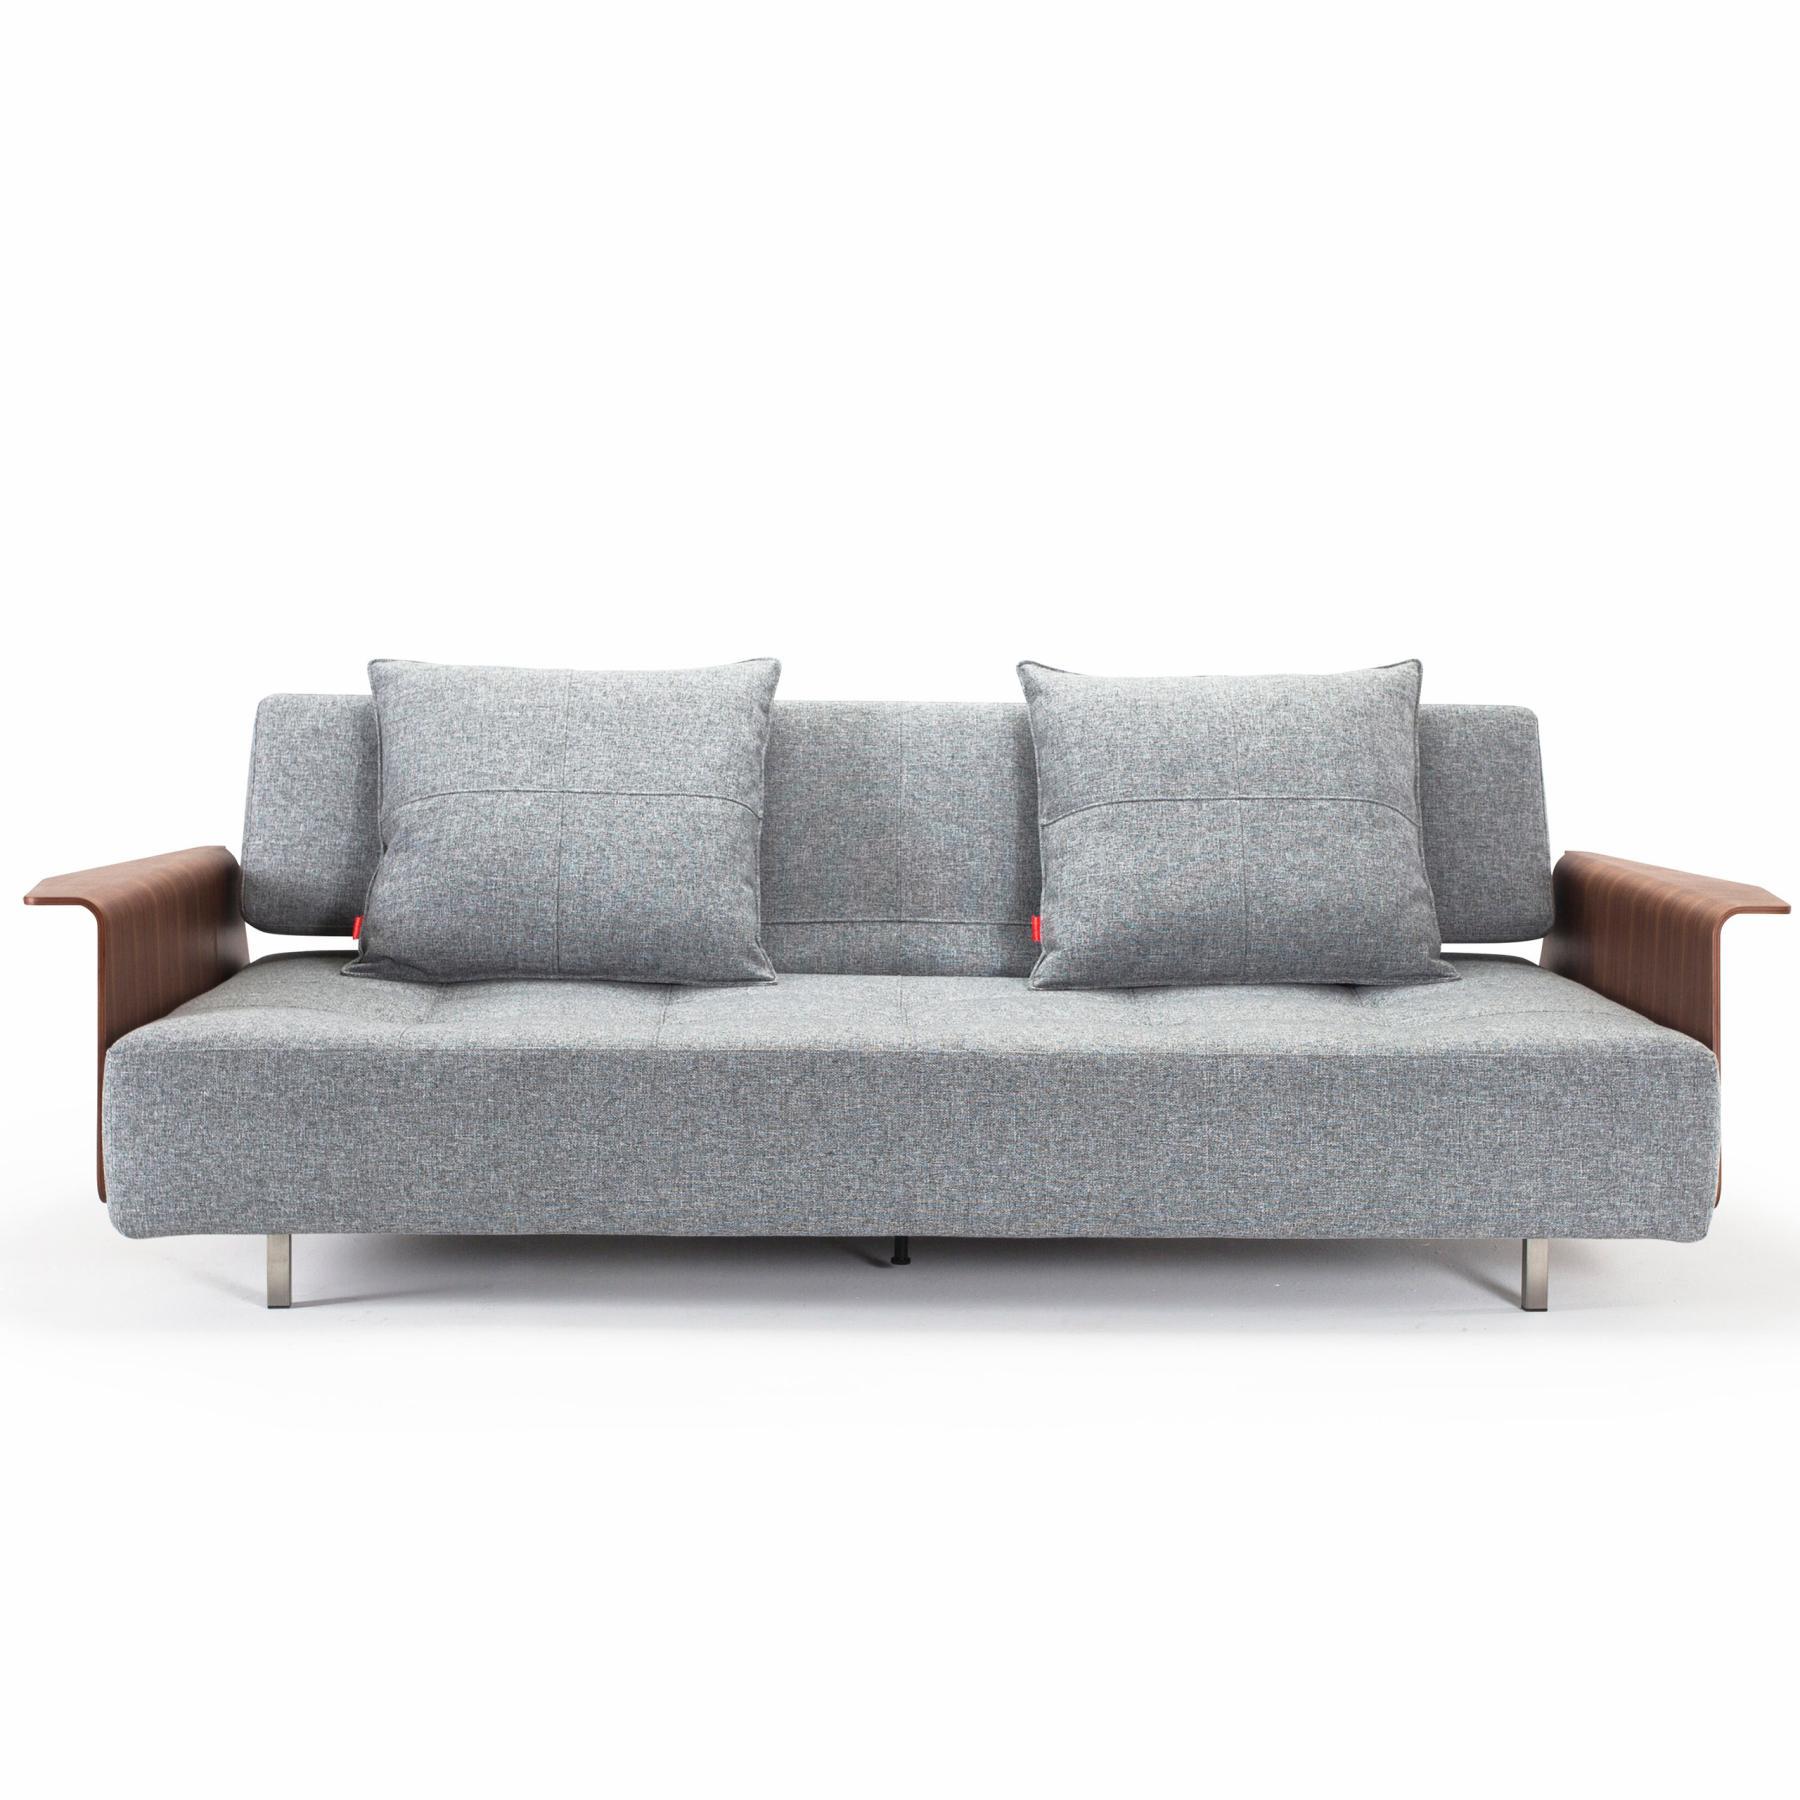 long-horn-sofa-with-arms-565-p4